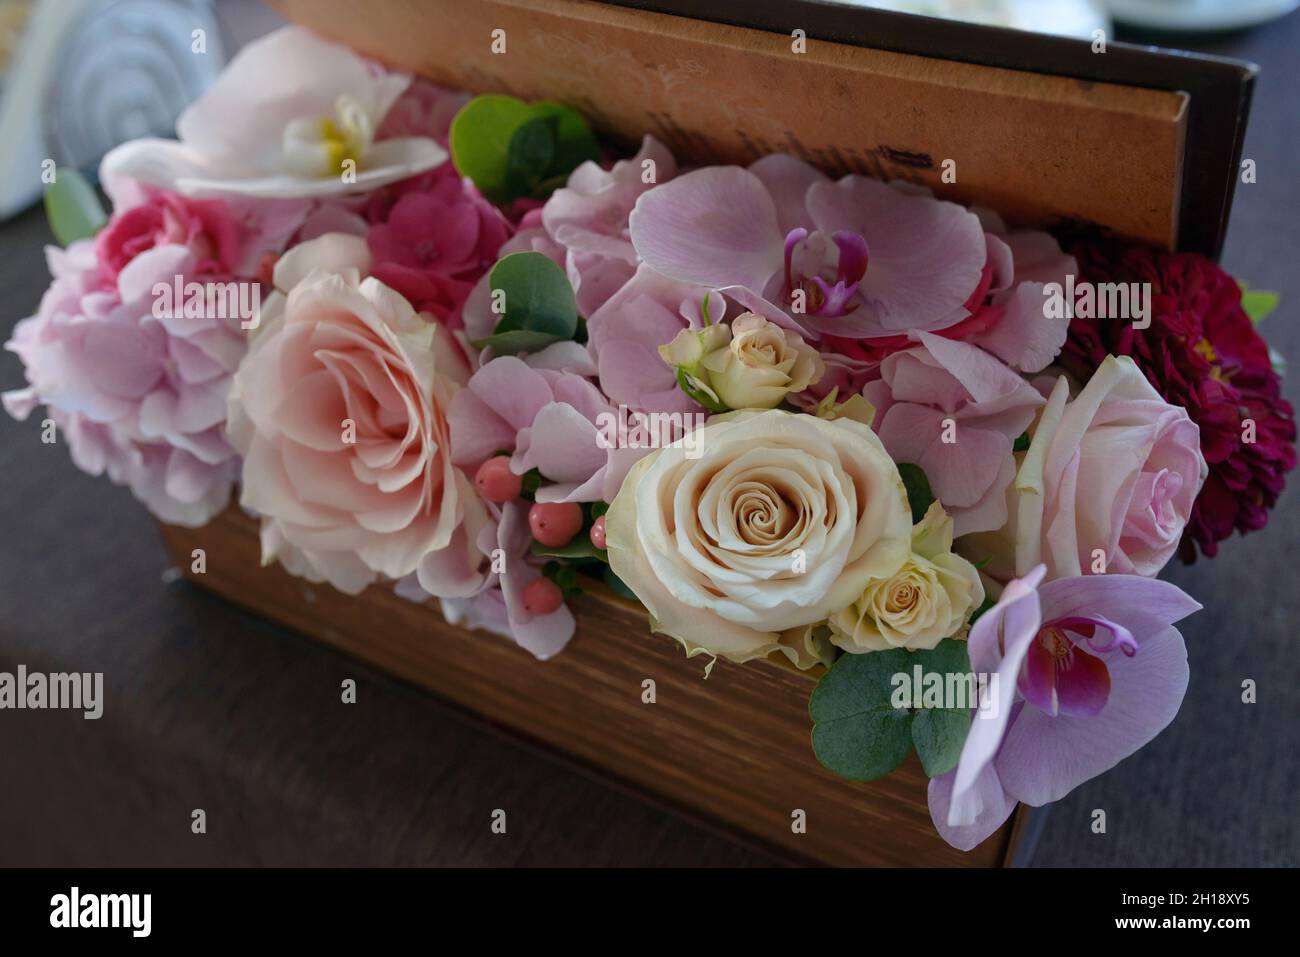 Rectangular wooden box containing a mixed pastel color flower arrangement with roses, orchids and berries, table floral centerpiece and organic decor Stock Photo